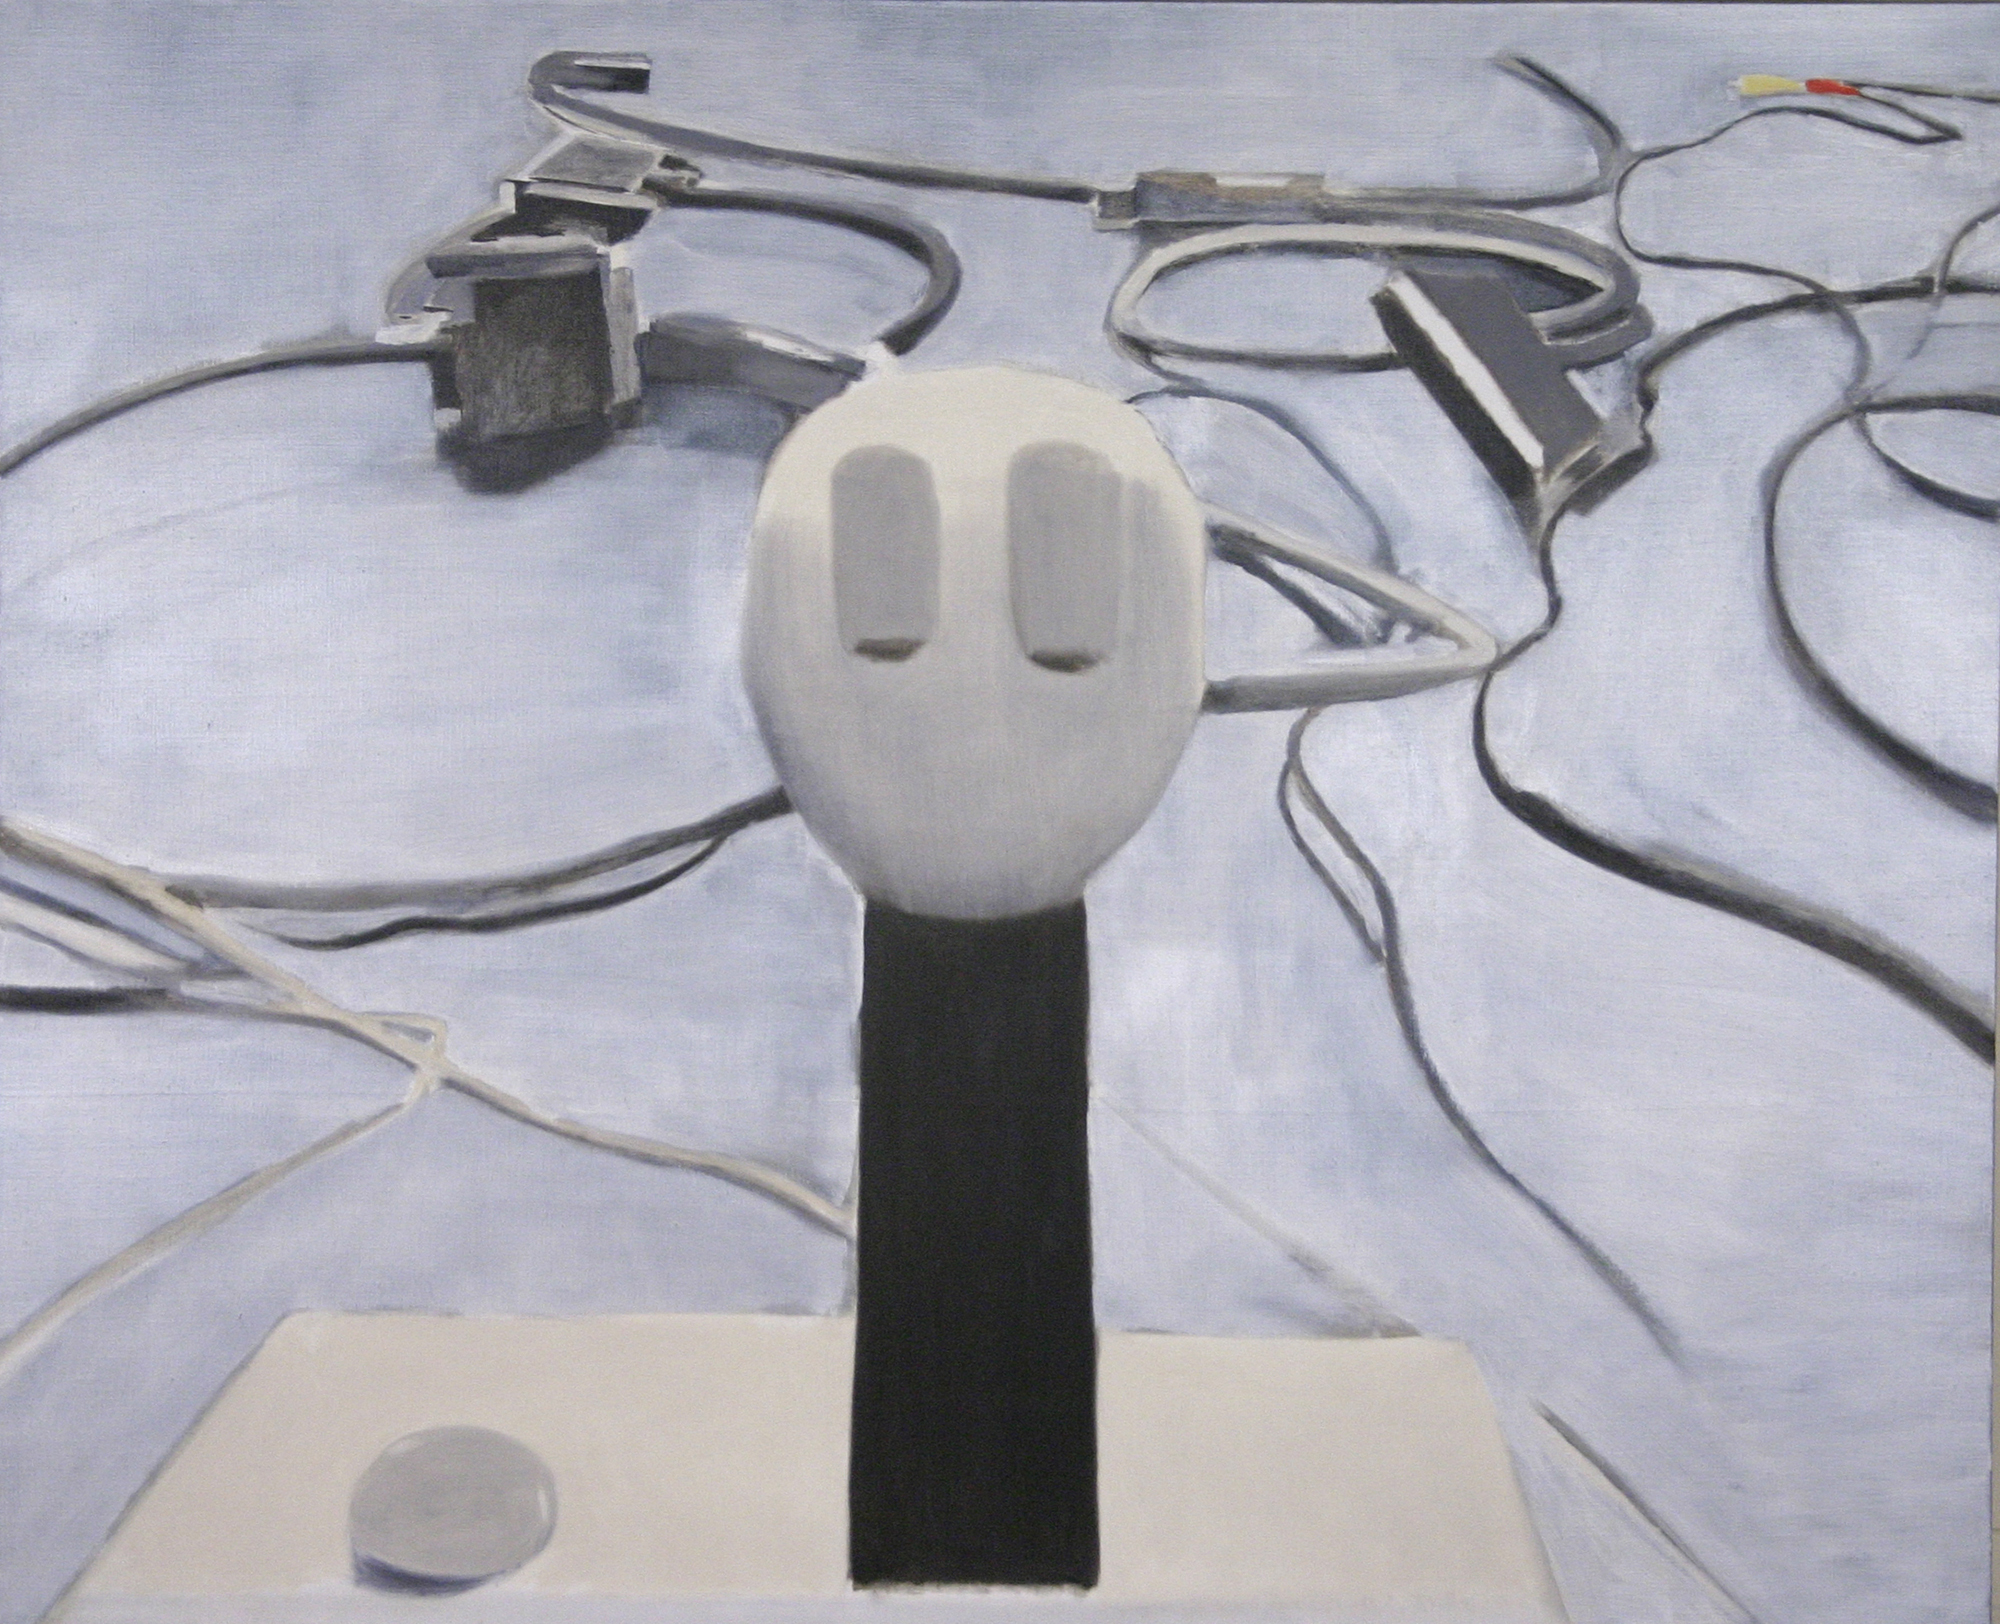 Miltos Manetas, Untitled (Joystick and Cables), 1999. Oil on canvas. Courtesy of the artist and Cosmic Galerie, Paris.